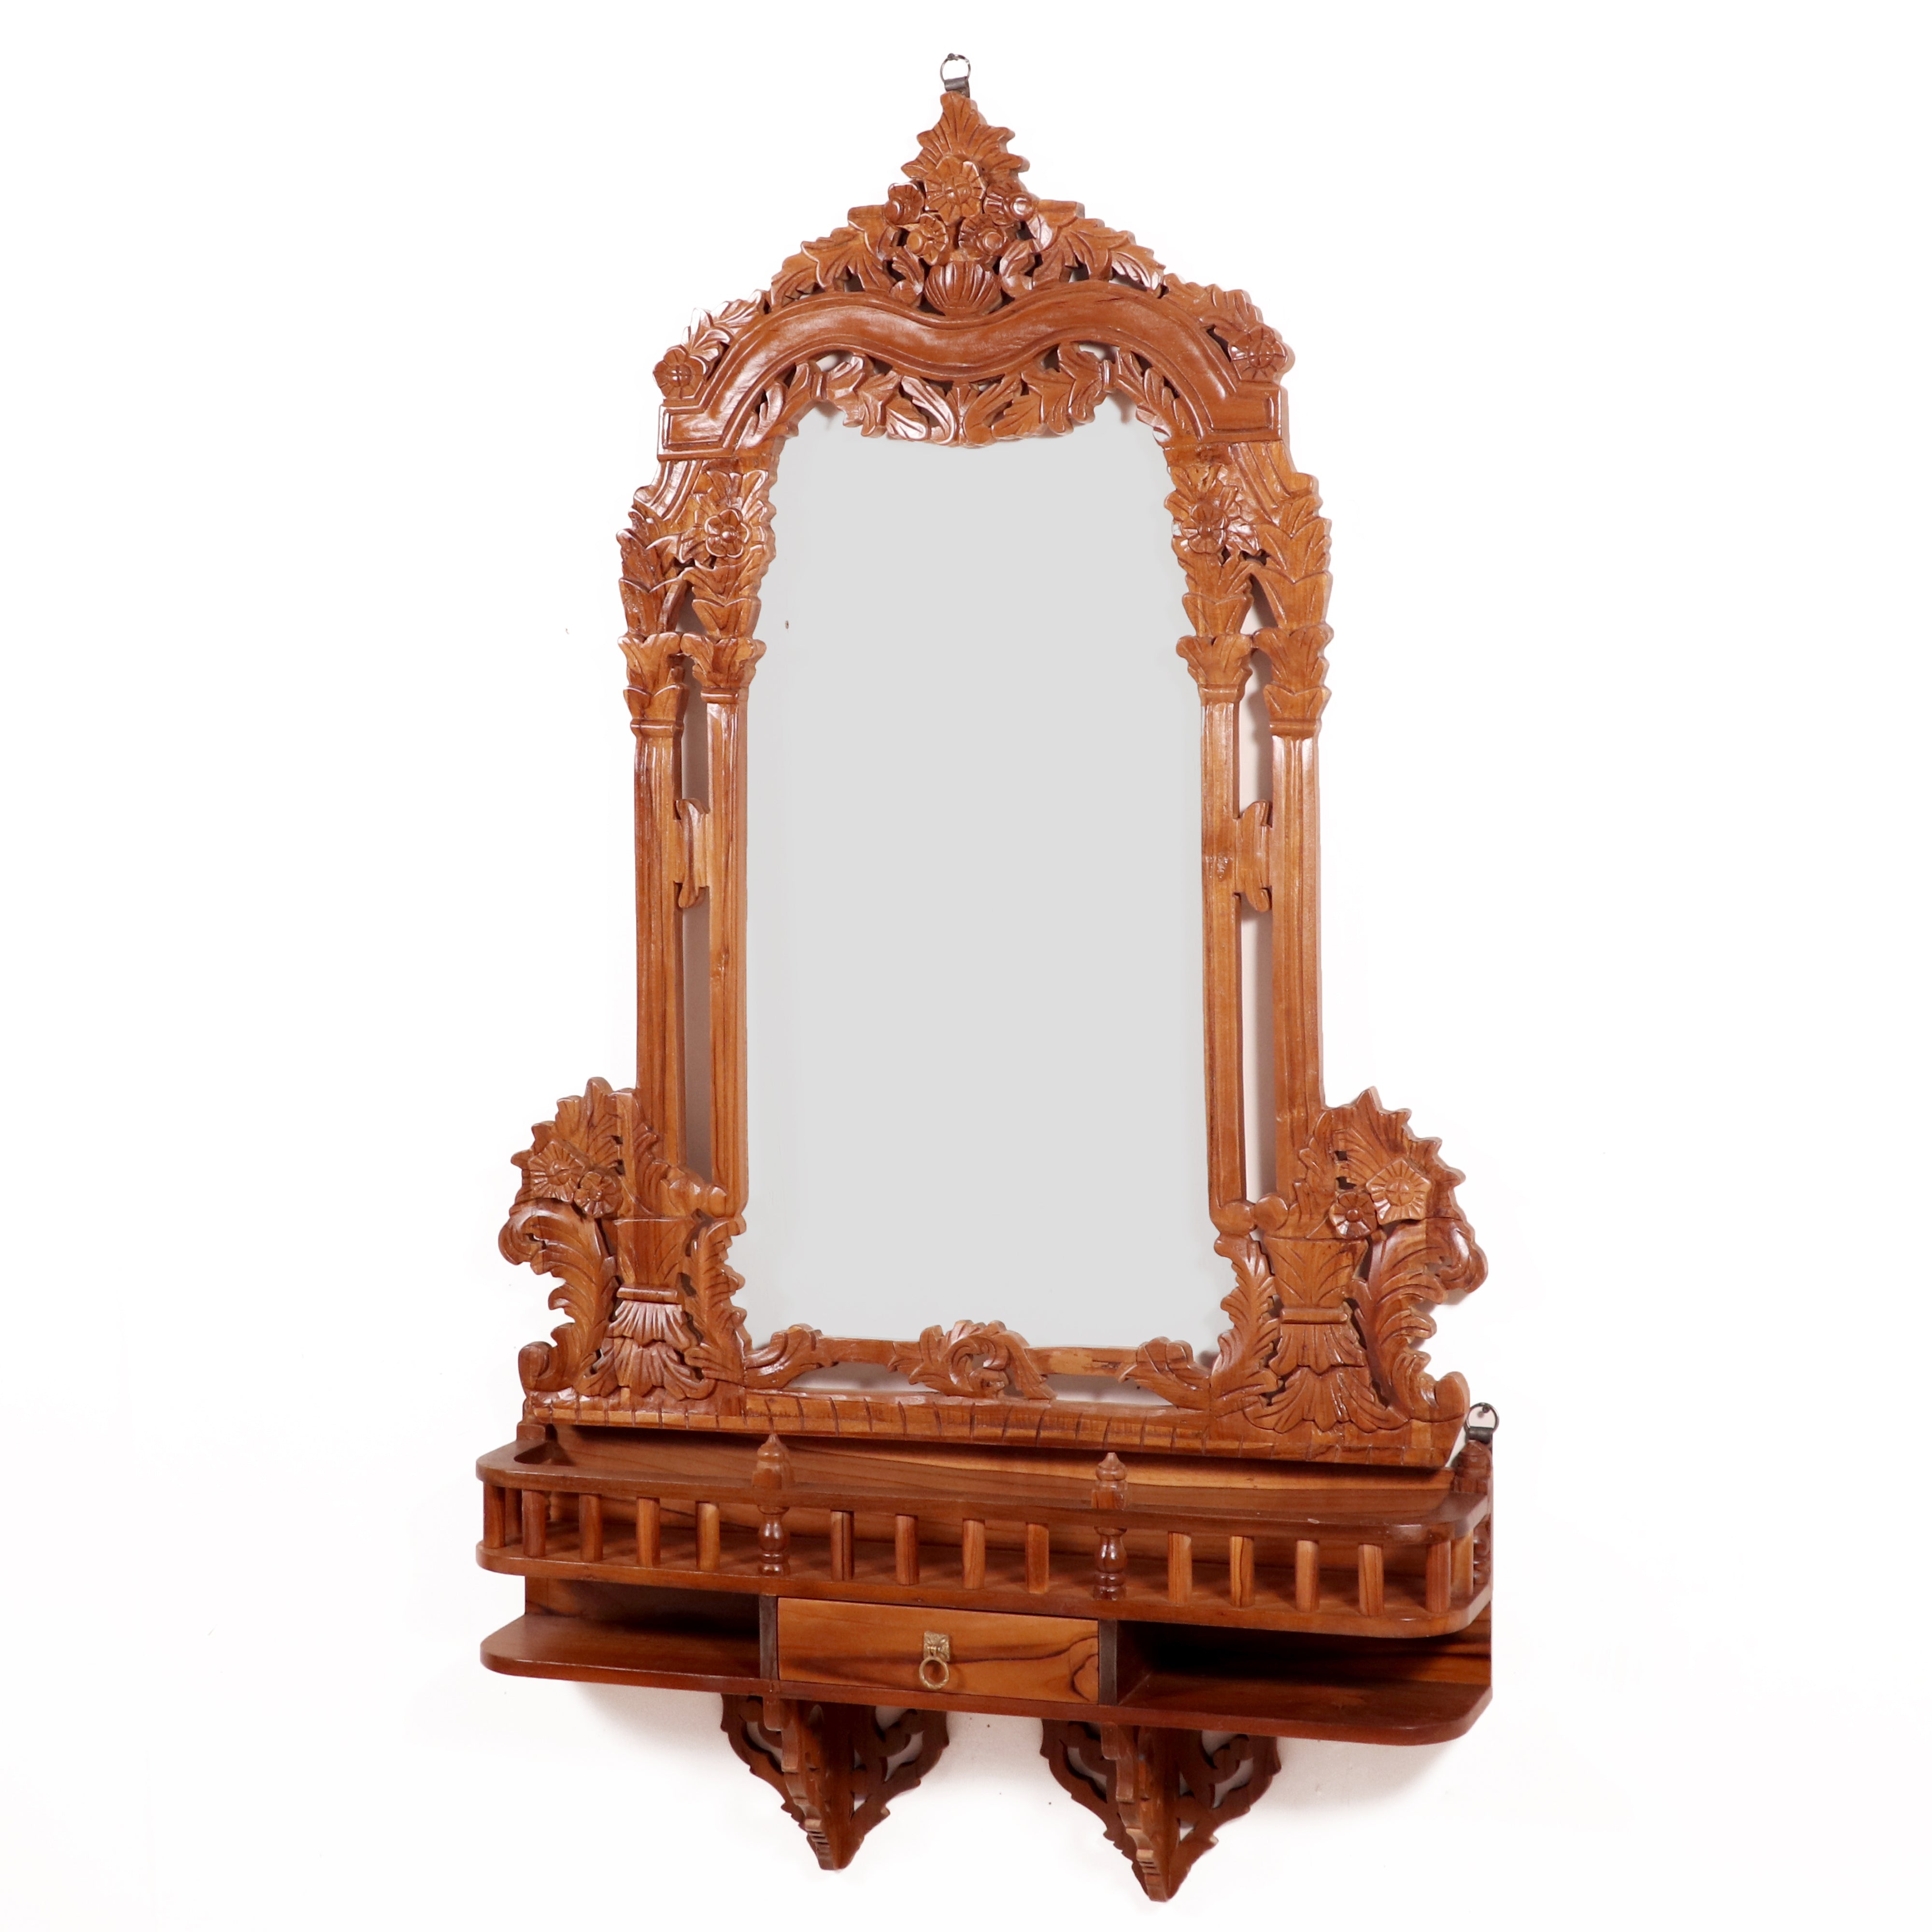 Traditional Teak Southern Minar Inspired Mirror Frame with 1 Drawer Mirror